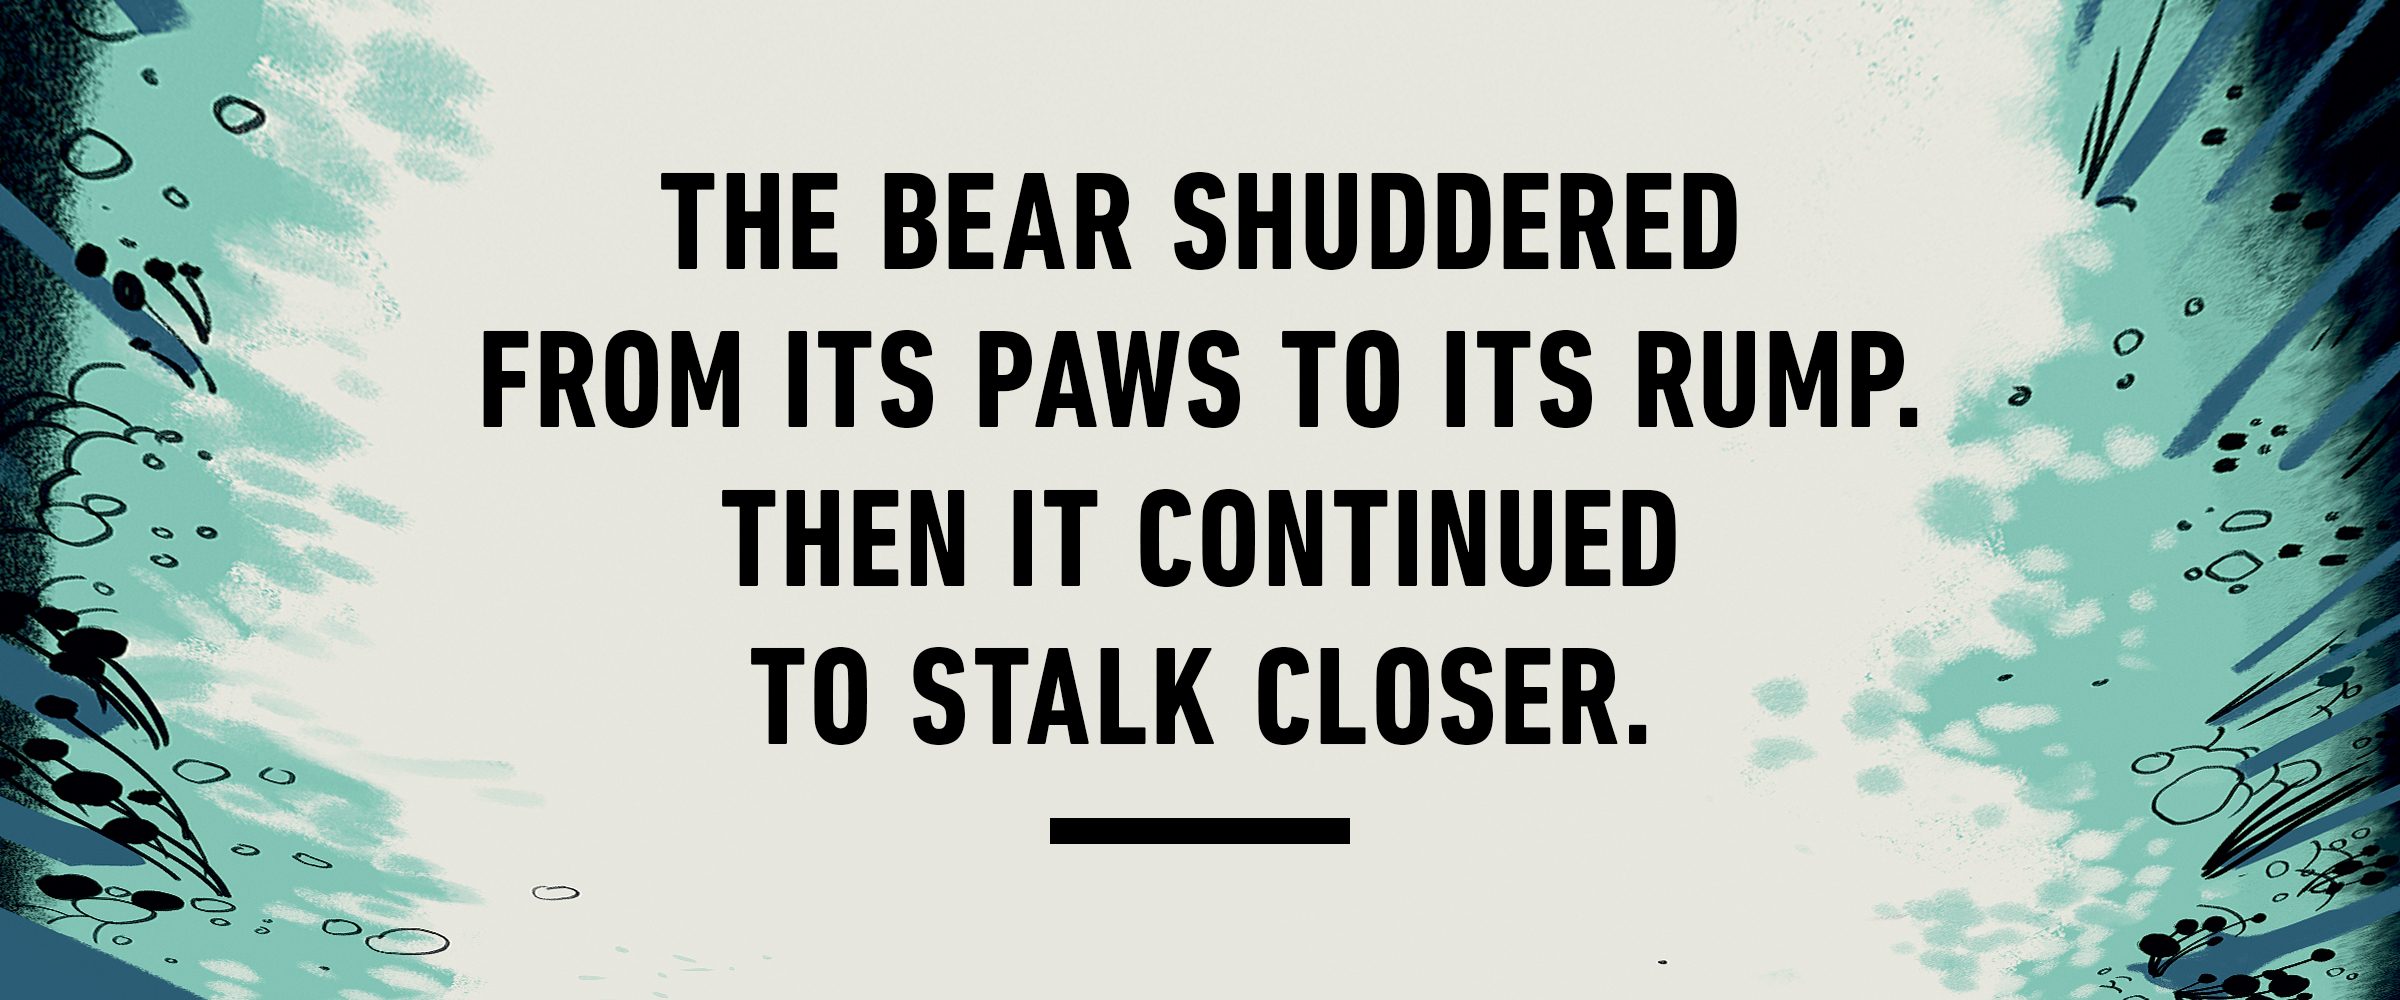 text: The bear shuddered from its paws to its rump. Then it continued to stalk closer.